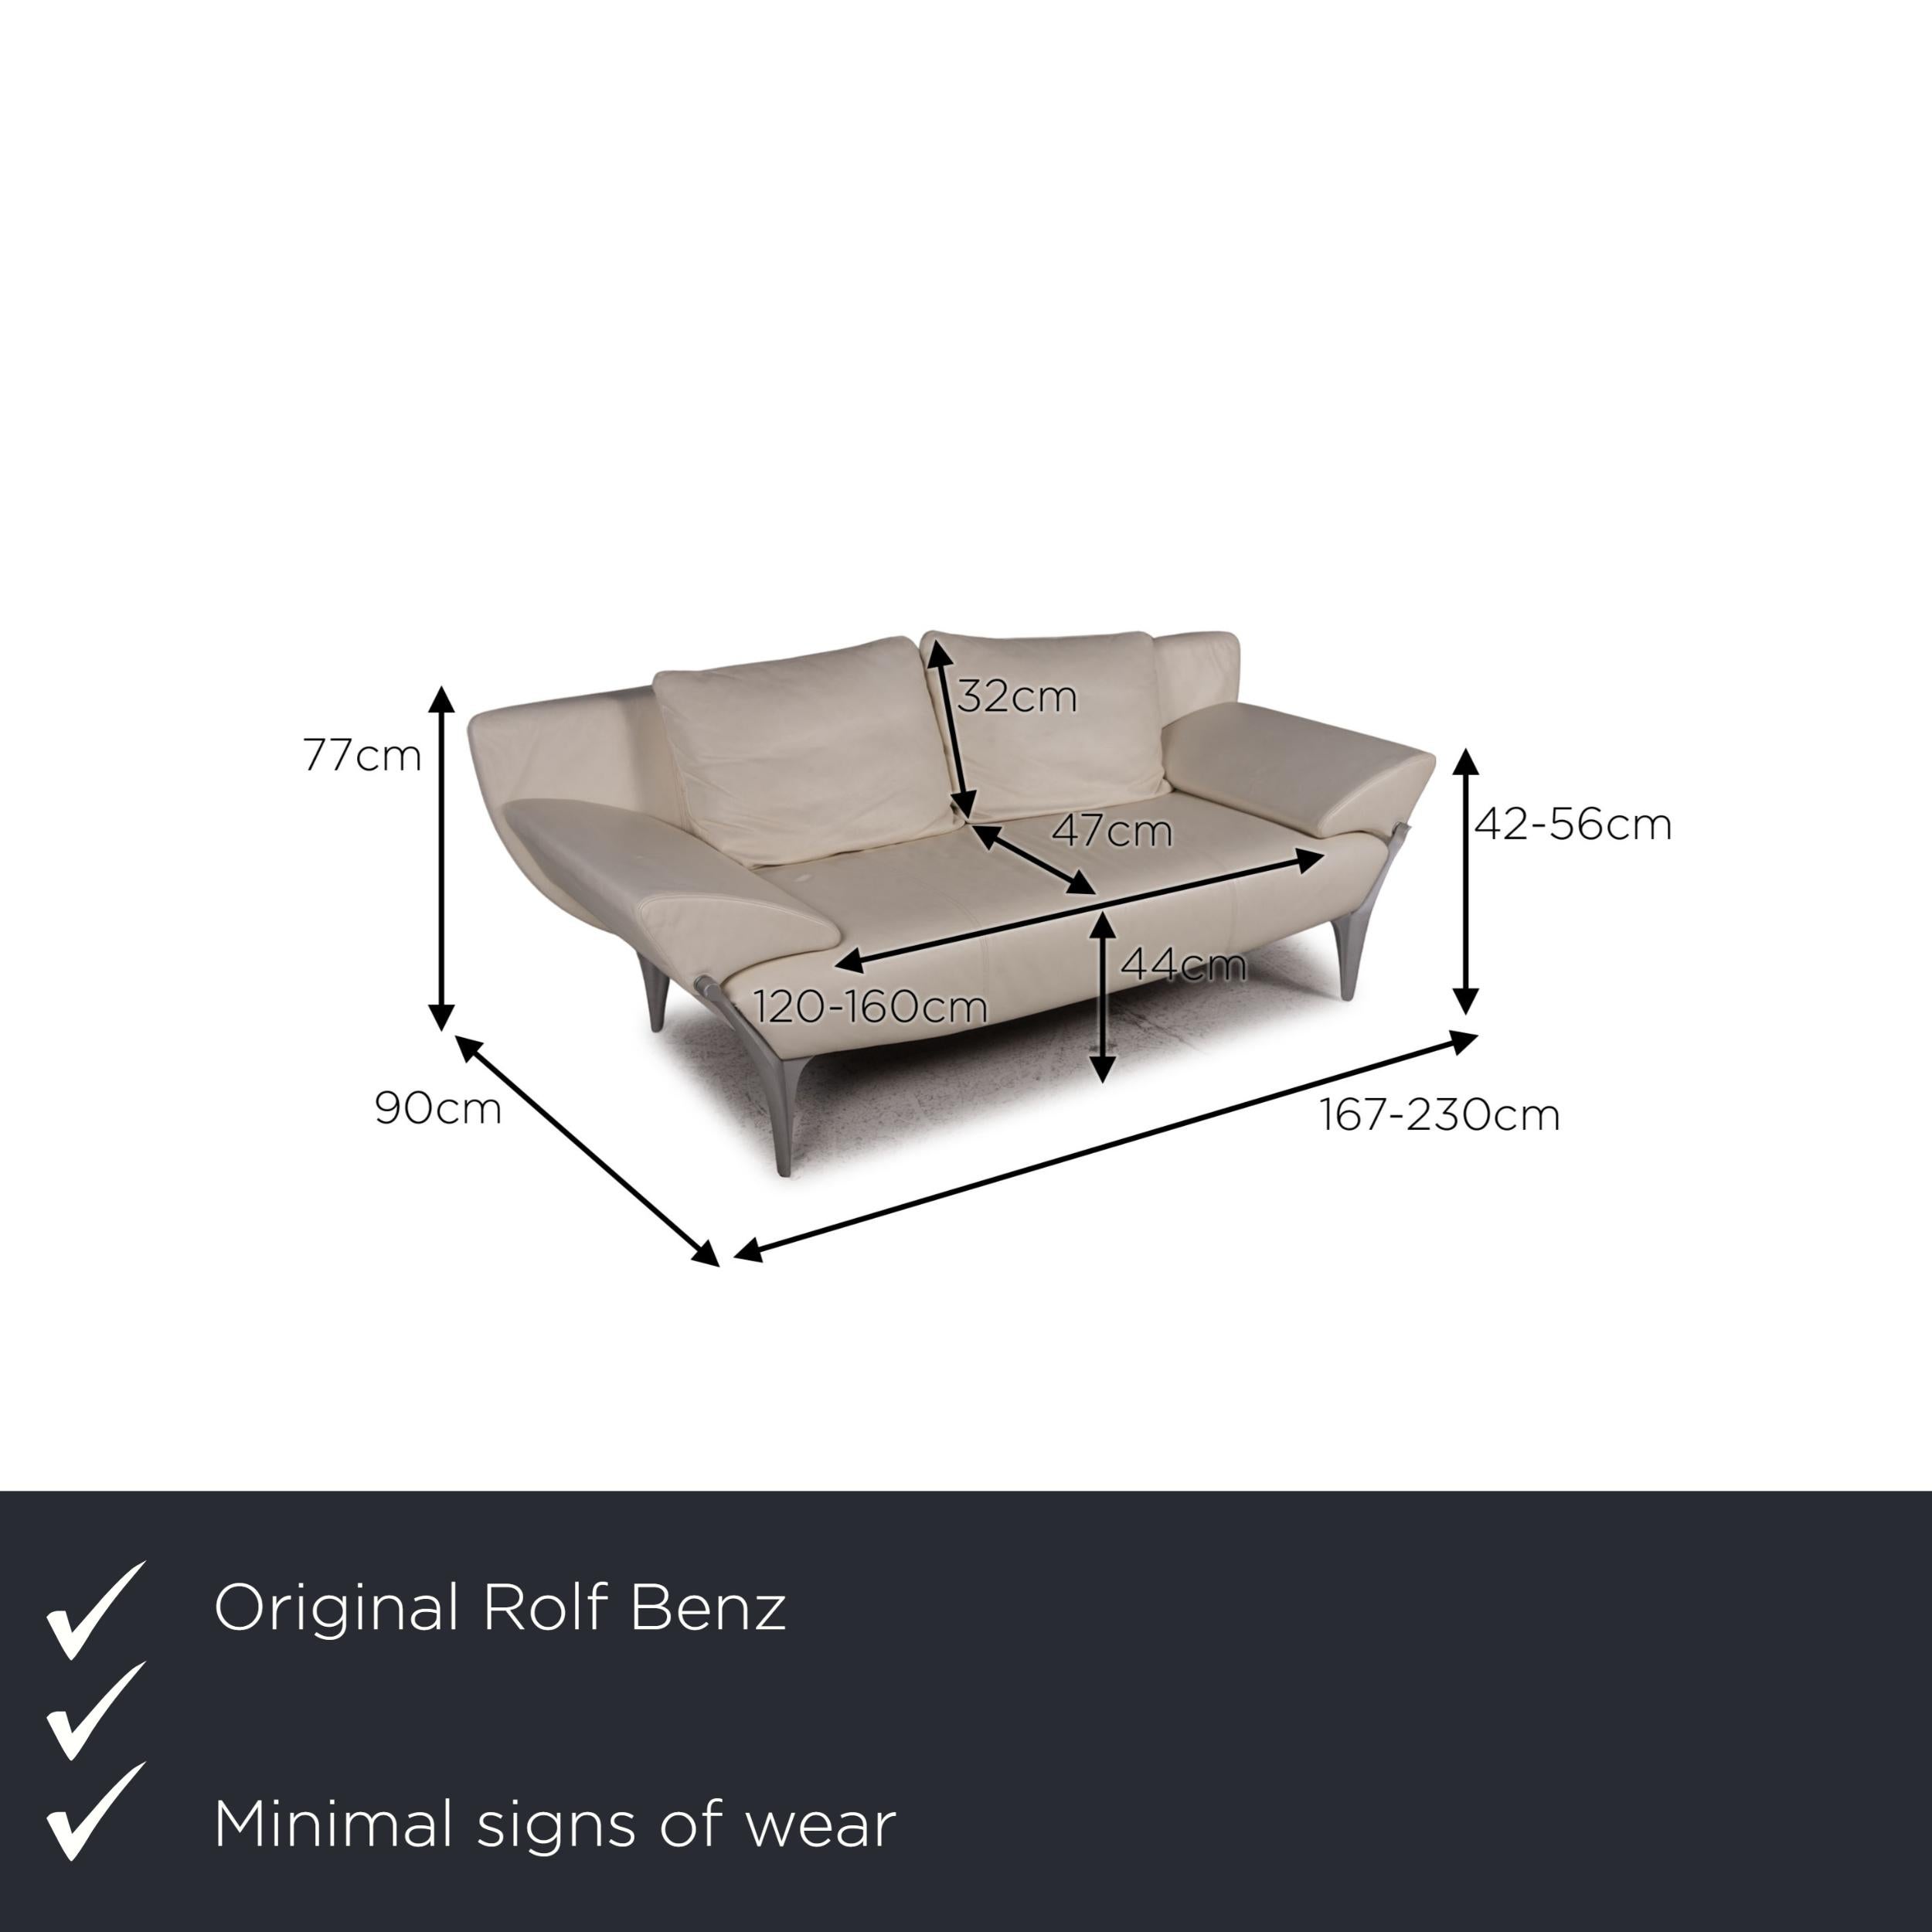 We present to you a Rolf Benz 1600 leather sofa cream three-seater couch function.

Product measurements in centimeters:

Depth: 90
Width: 197
Height: 77
Seat height: 44
Rest height: 42
Seat depth: 47
Seat width: 120
Back height: